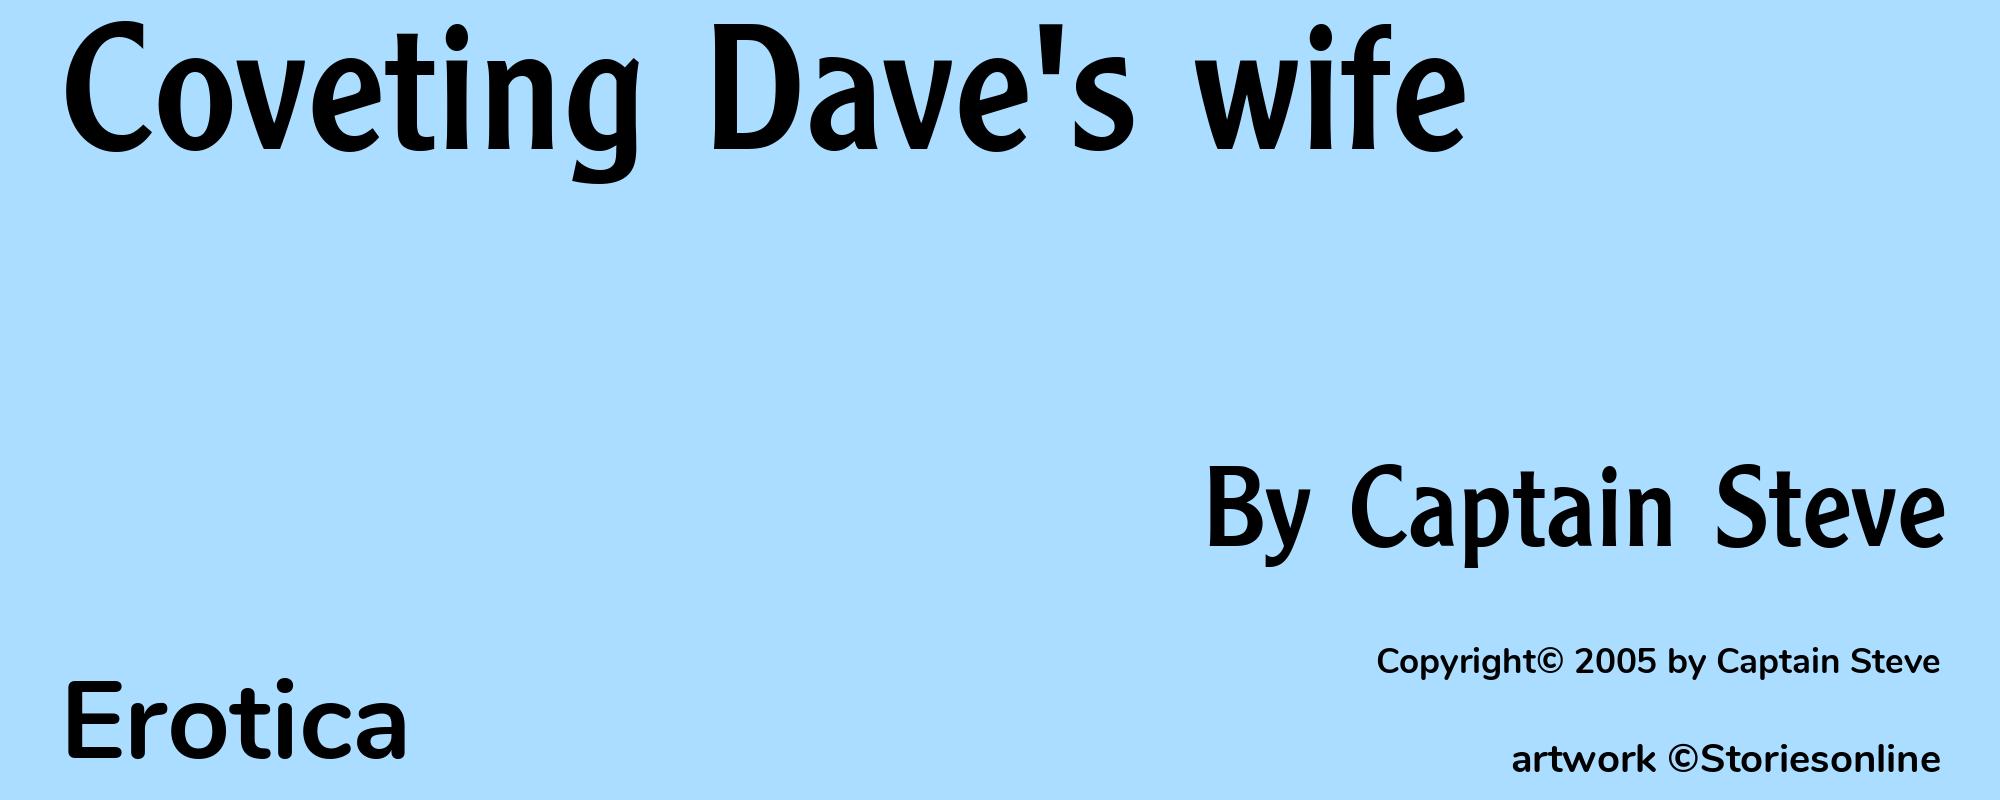 Coveting Dave's wife - Cover